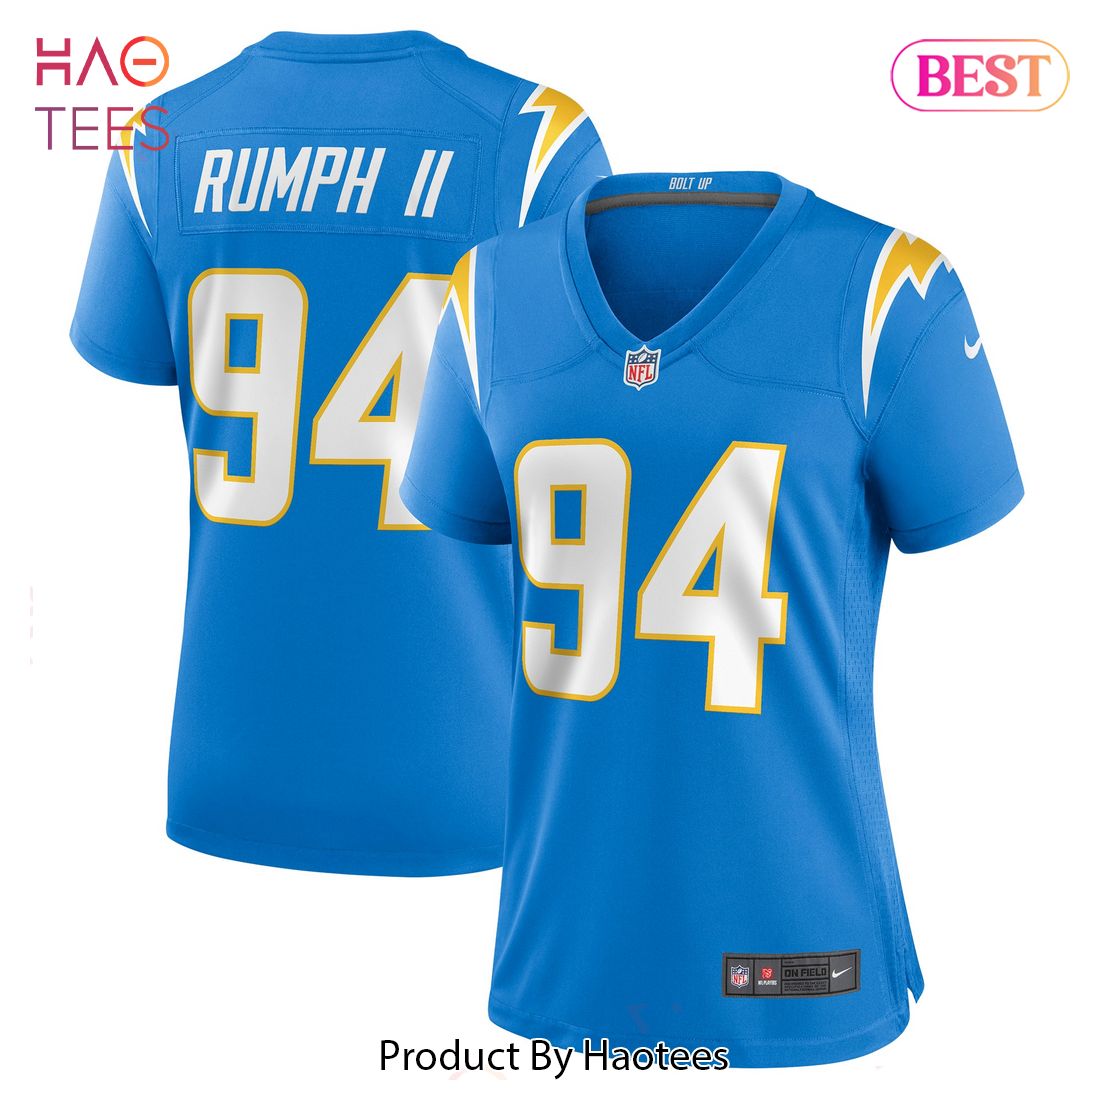 Chris Rumph II Los Angeles Chargers Nike Women’s Game Jersey Powder Blue